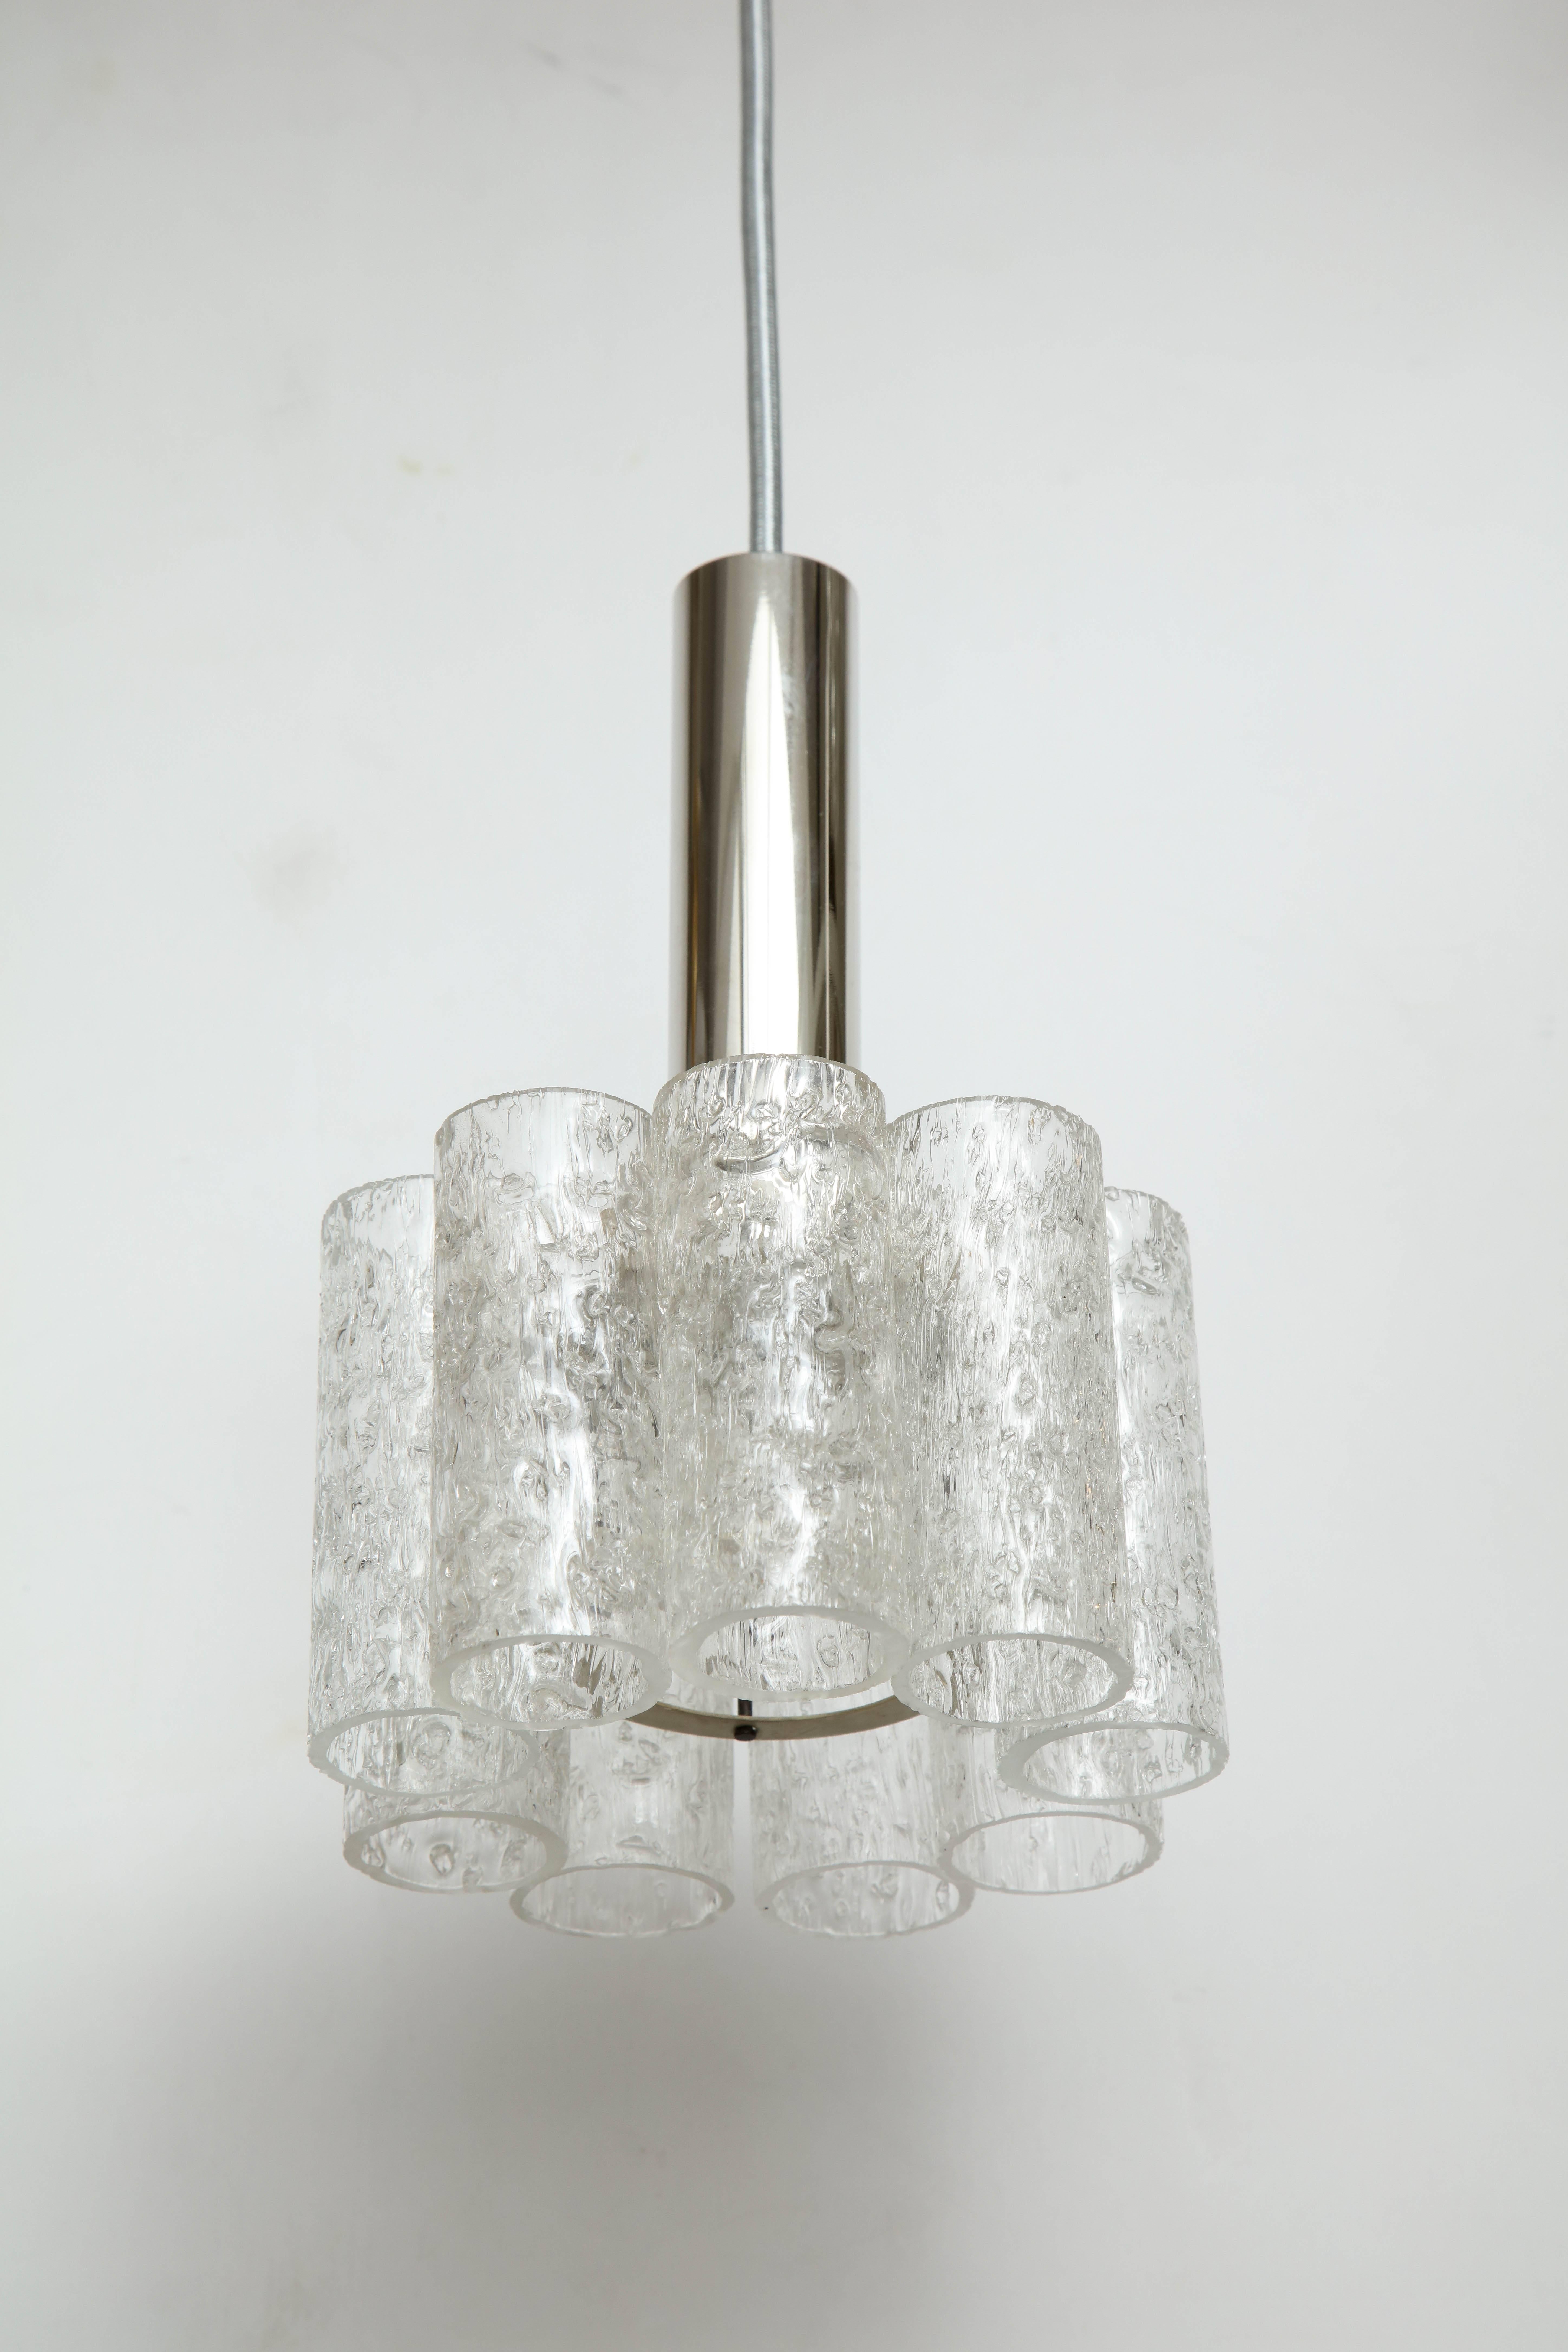 Midcentury Murano ice glass tube pendants with polished nickel collars and canopies. Pendants have been rewired for use in the USA with silver cord, one-light source, 60W max. Length is adjustable. Length of glass body and collar is 9